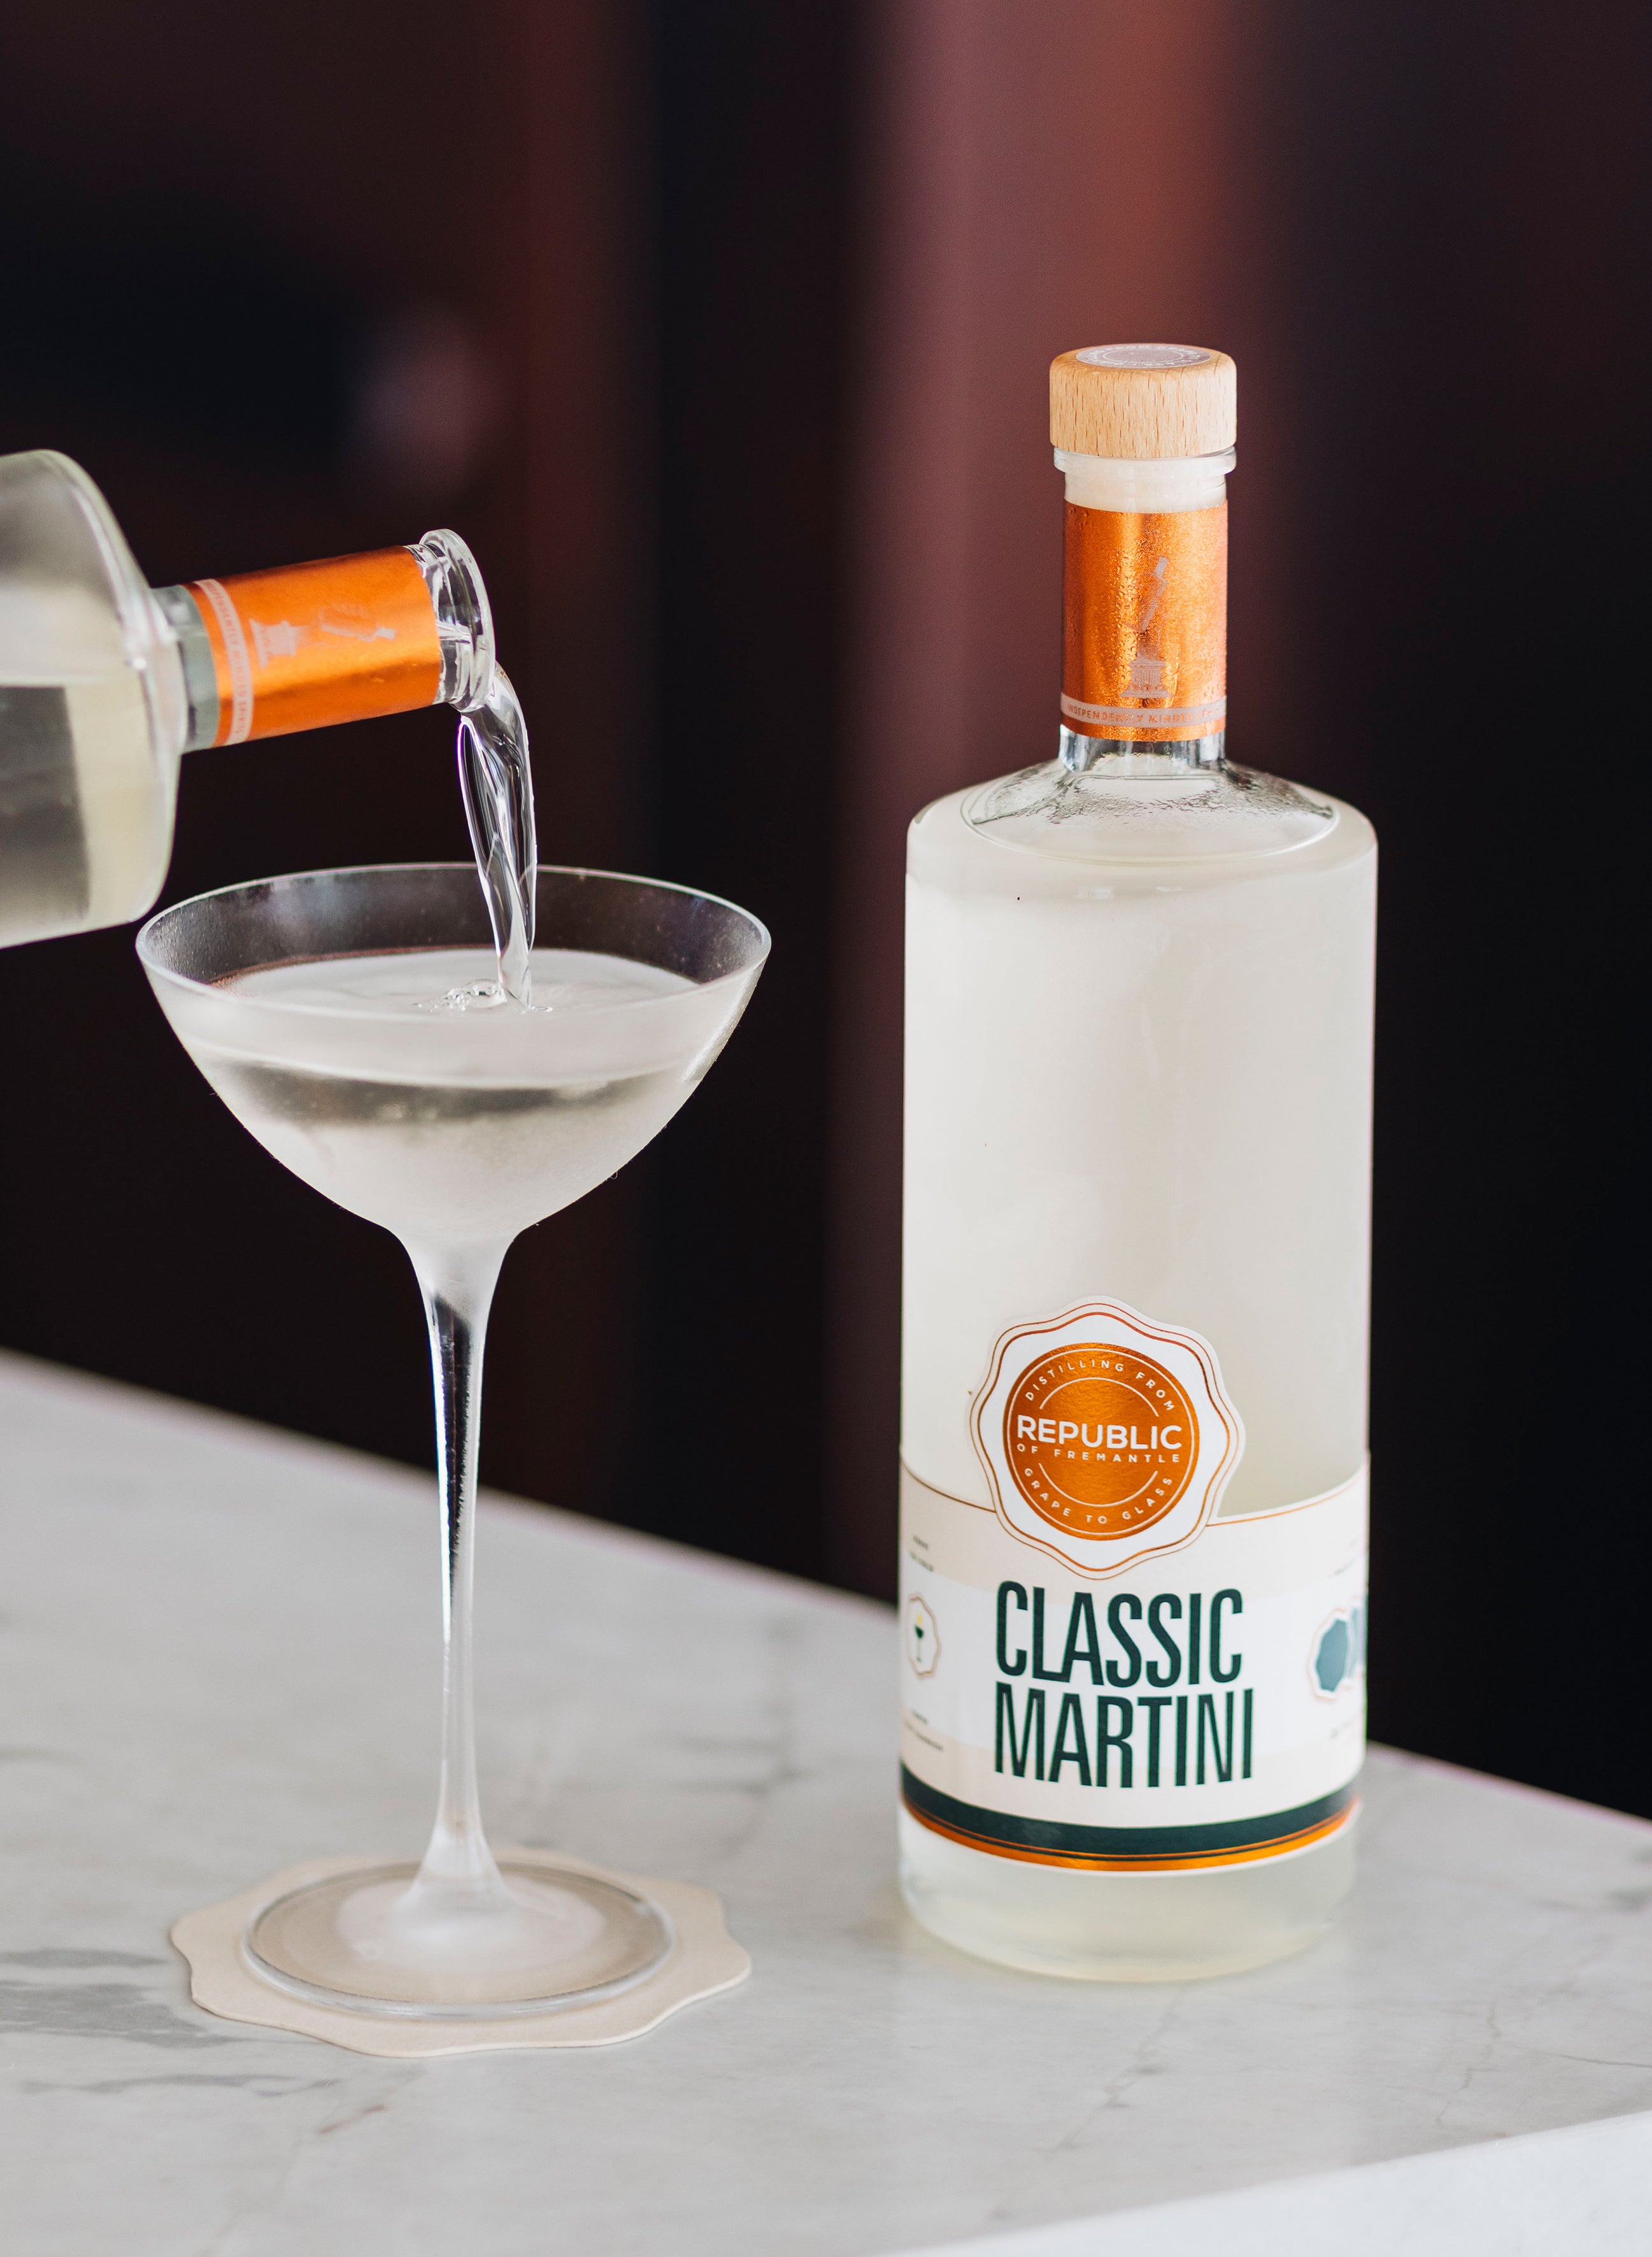 Classic Martini Bottled Cocktail